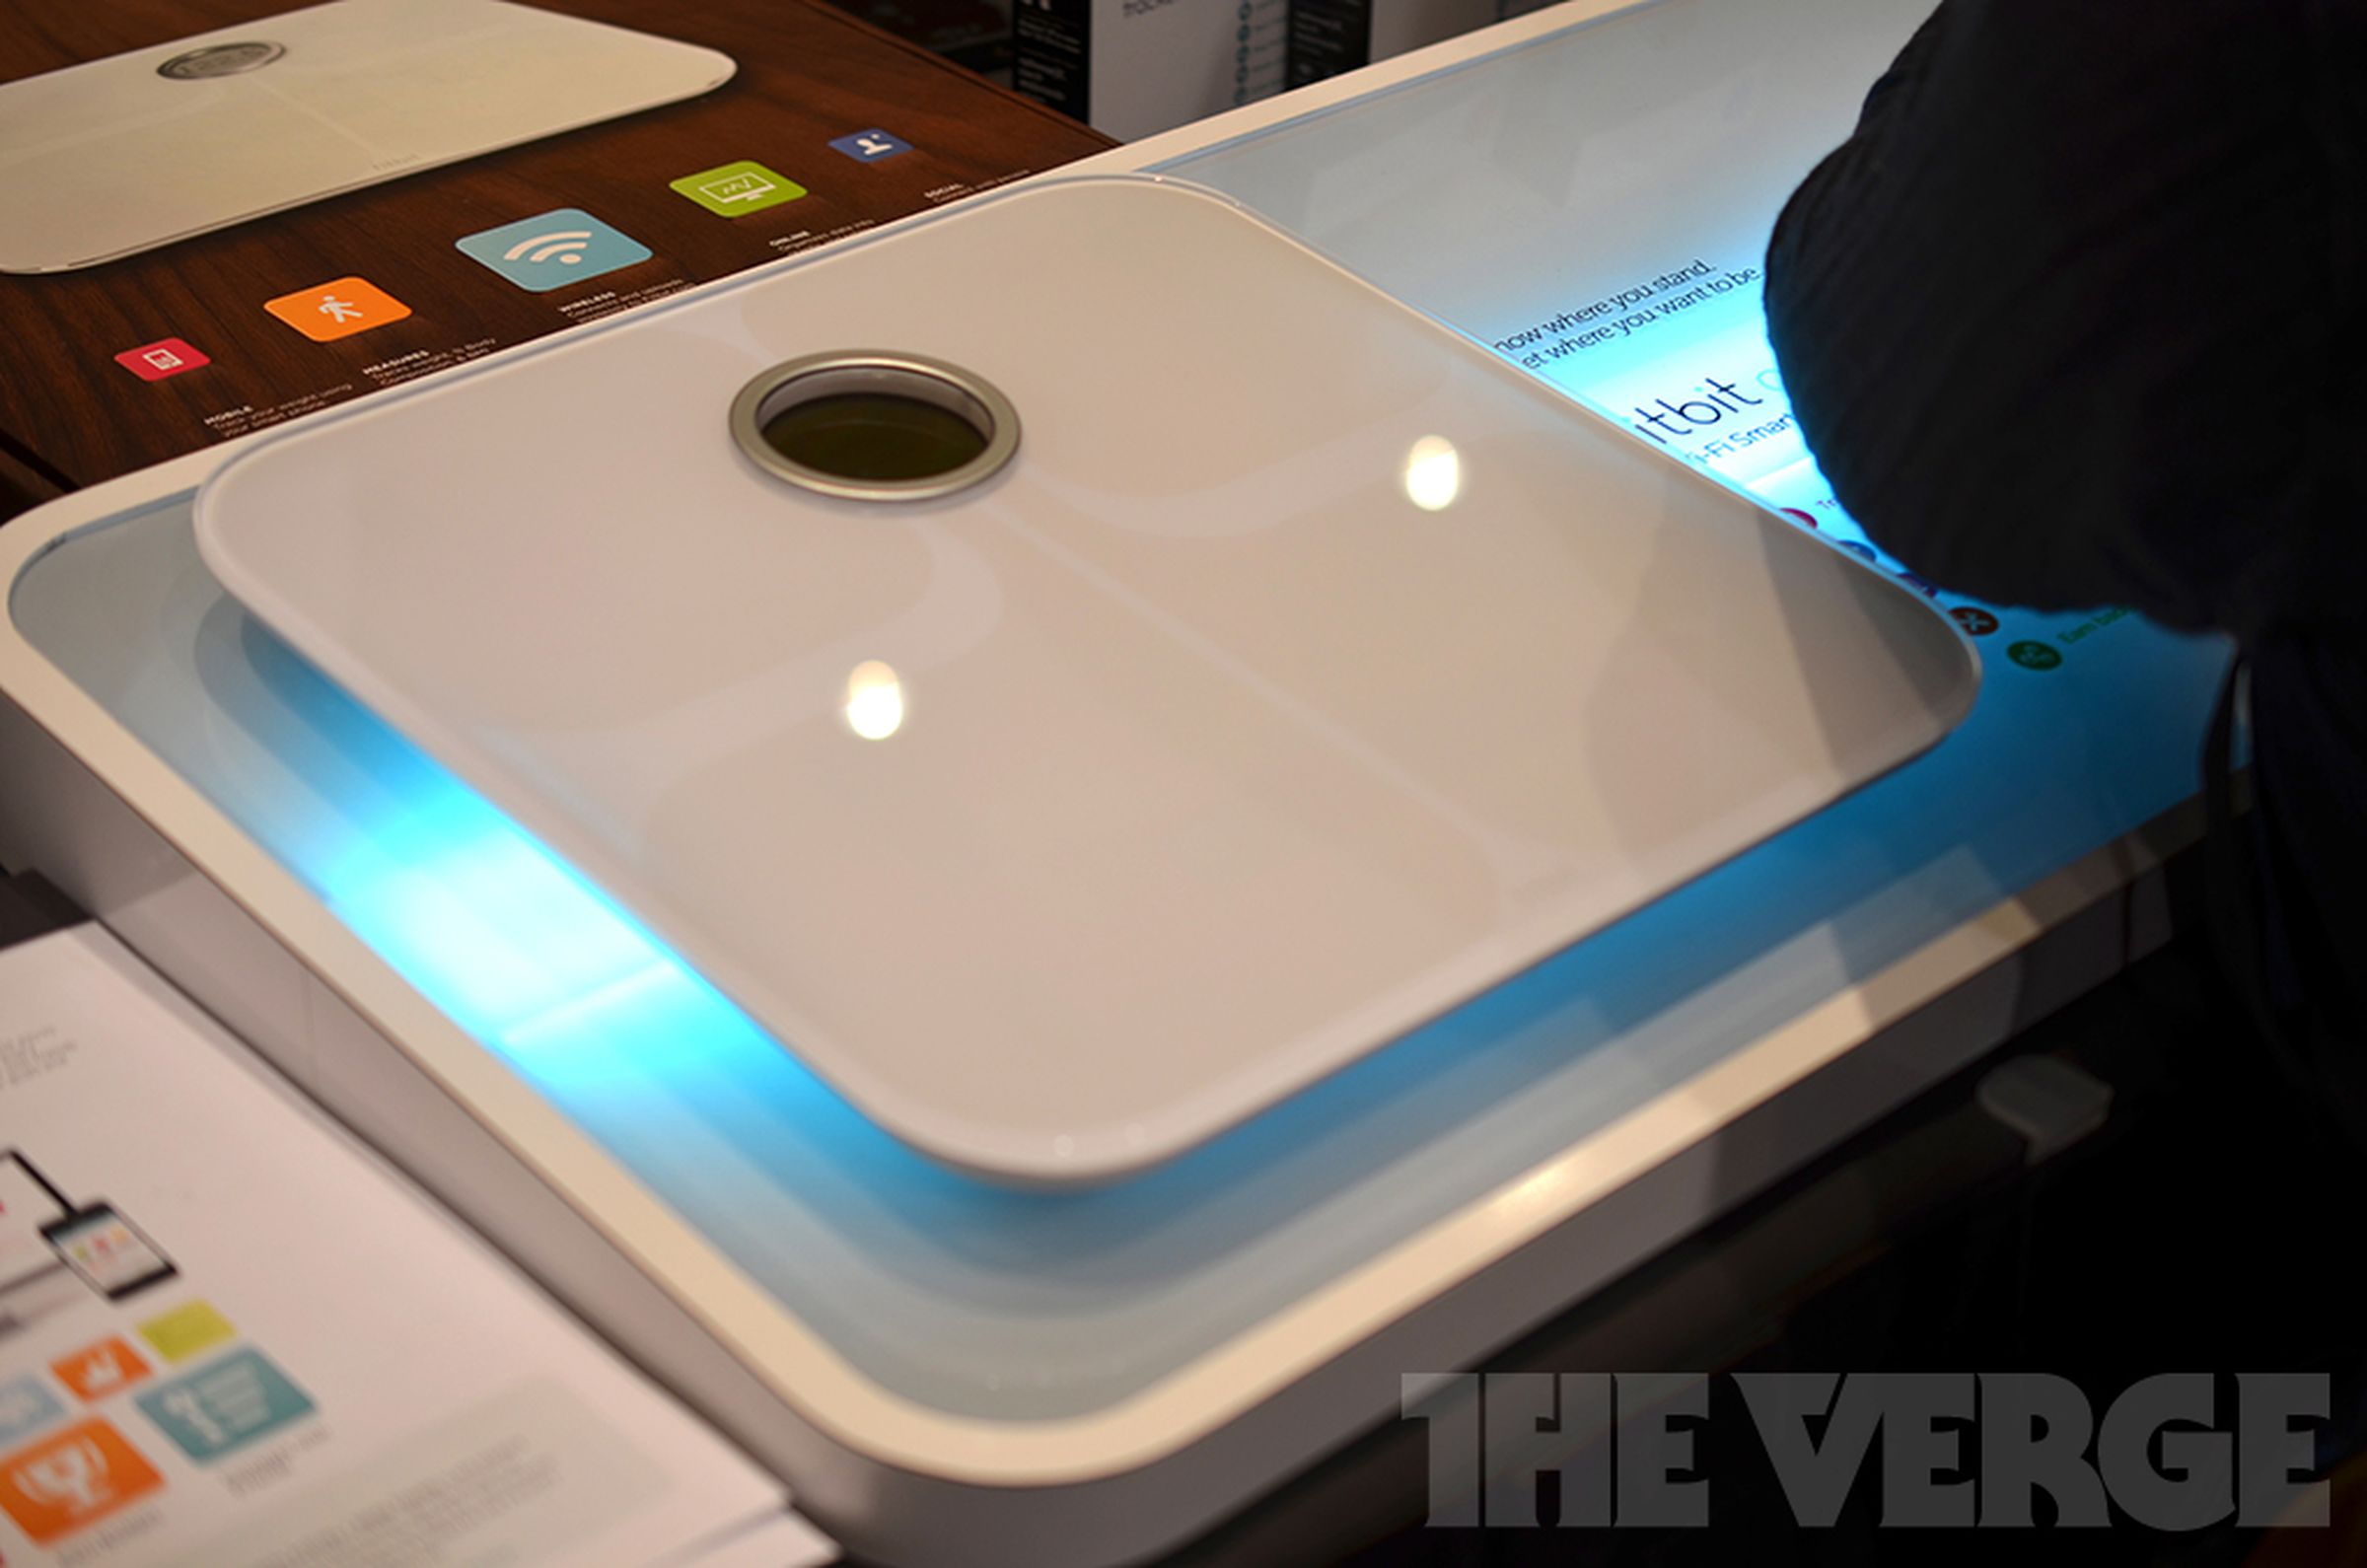 Fitbit Aria Wi-Fi Smart Scale hands-on photos